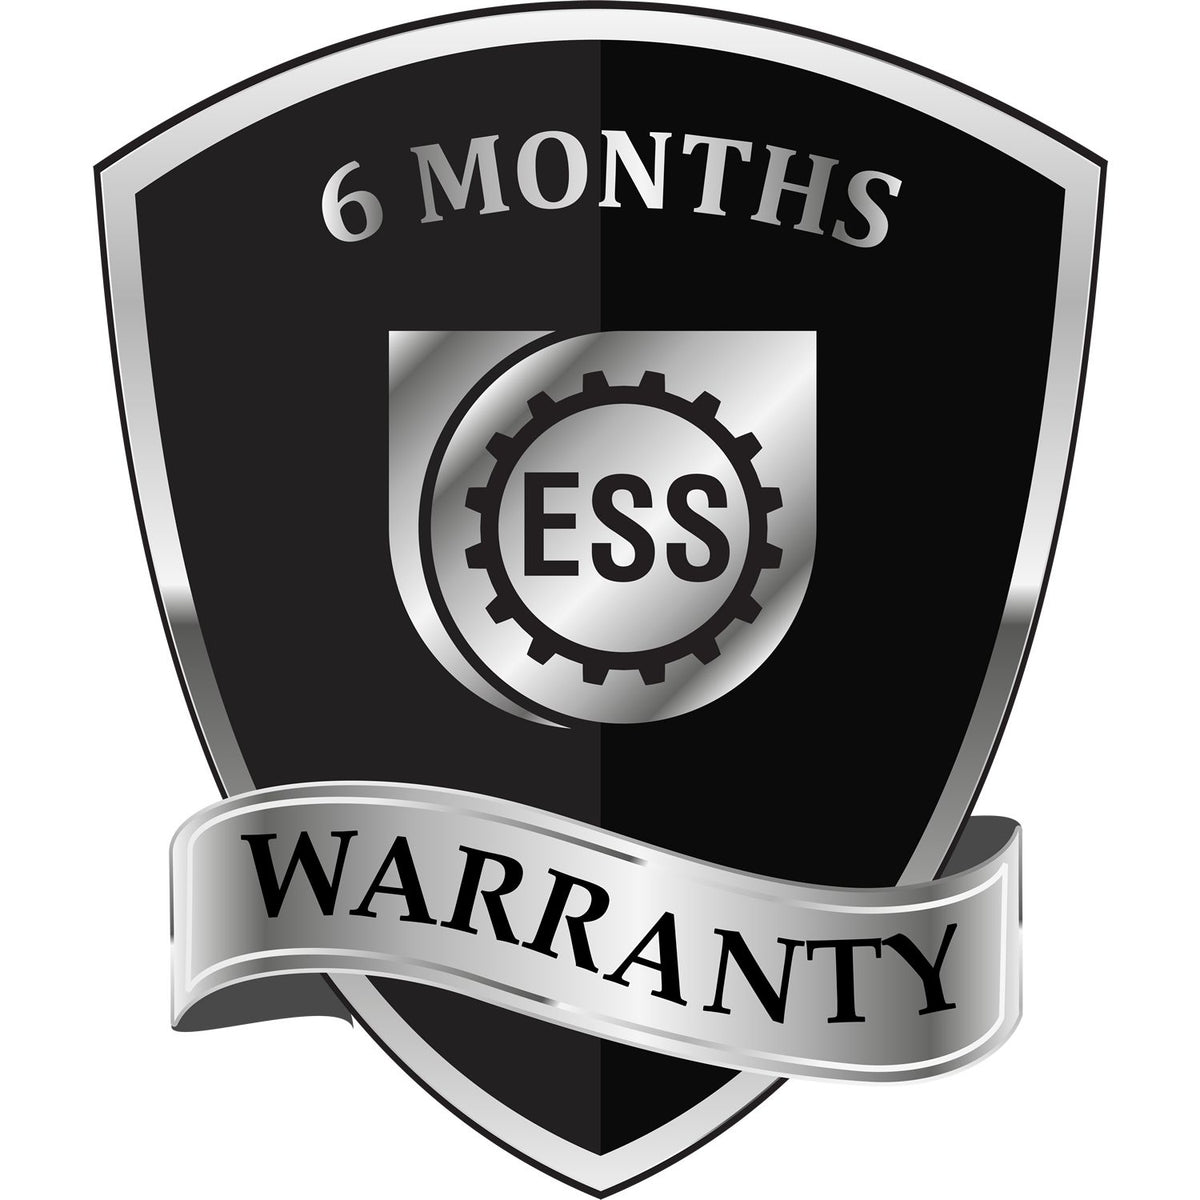 A badge or emblem showing a warranty icon for the Self-Inking Rectangular Colorado Notary Stamp